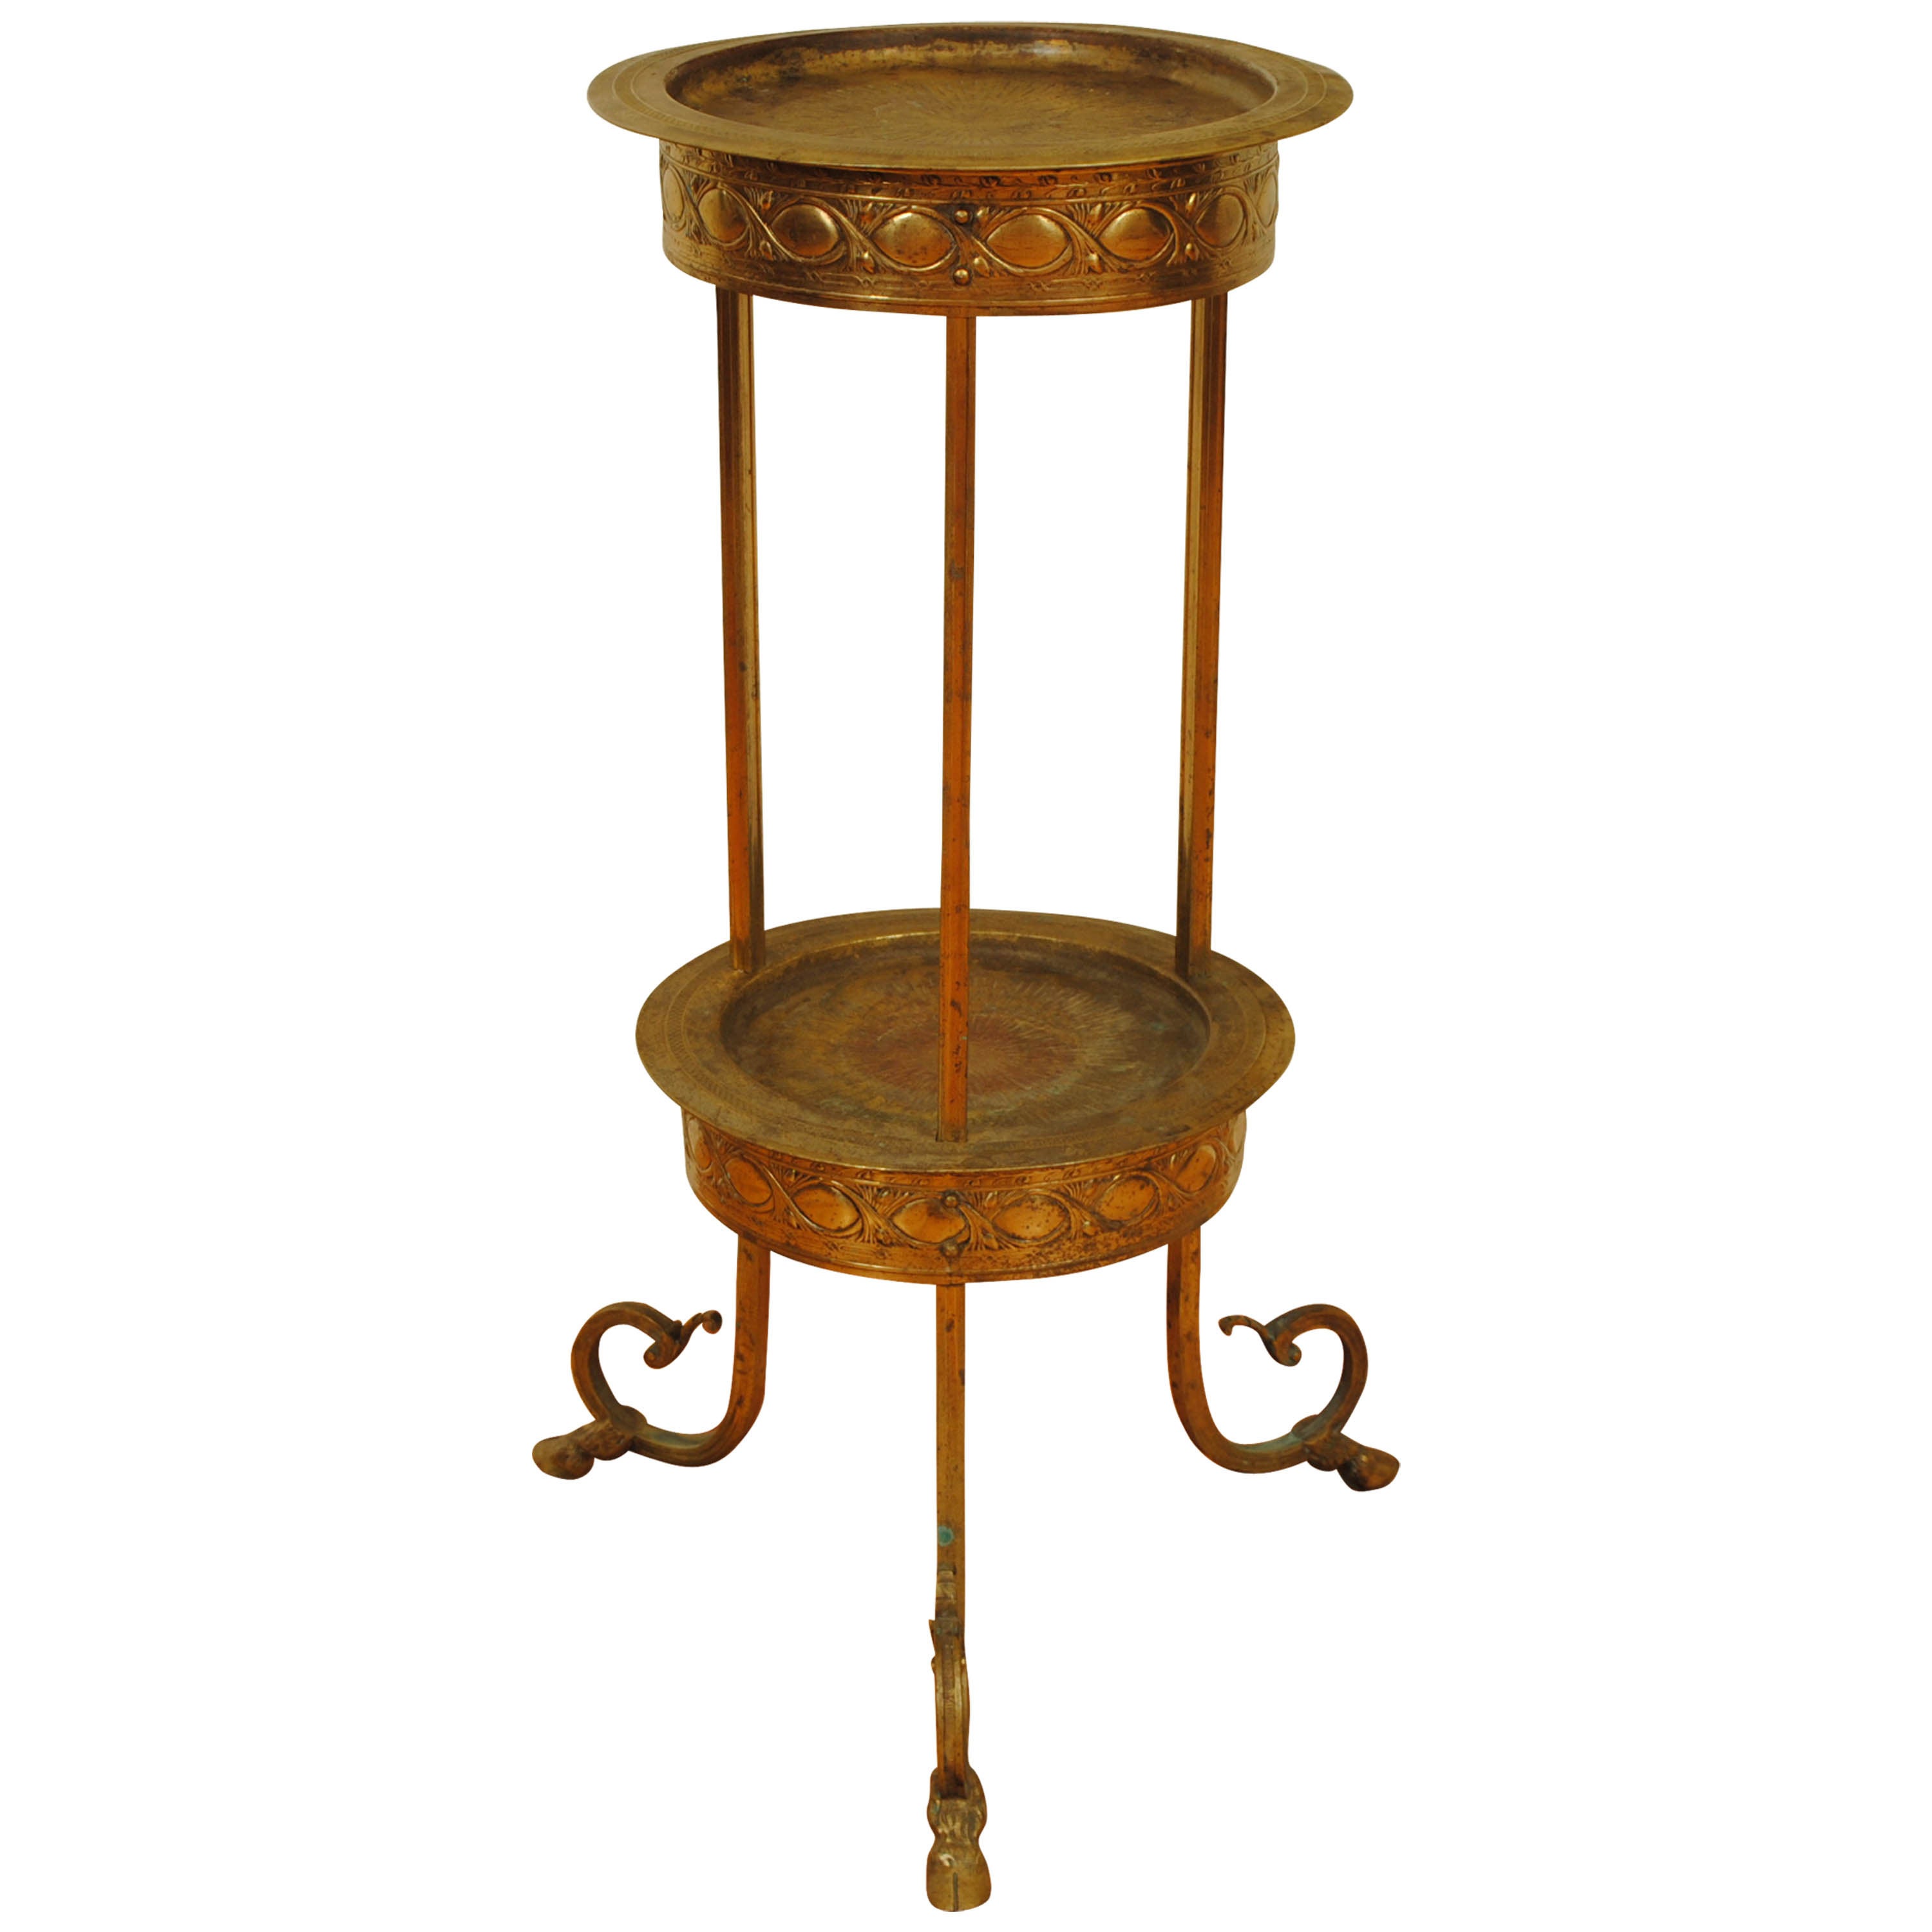 French Neoclassical Revival Brass Side Table, Late 19th Century